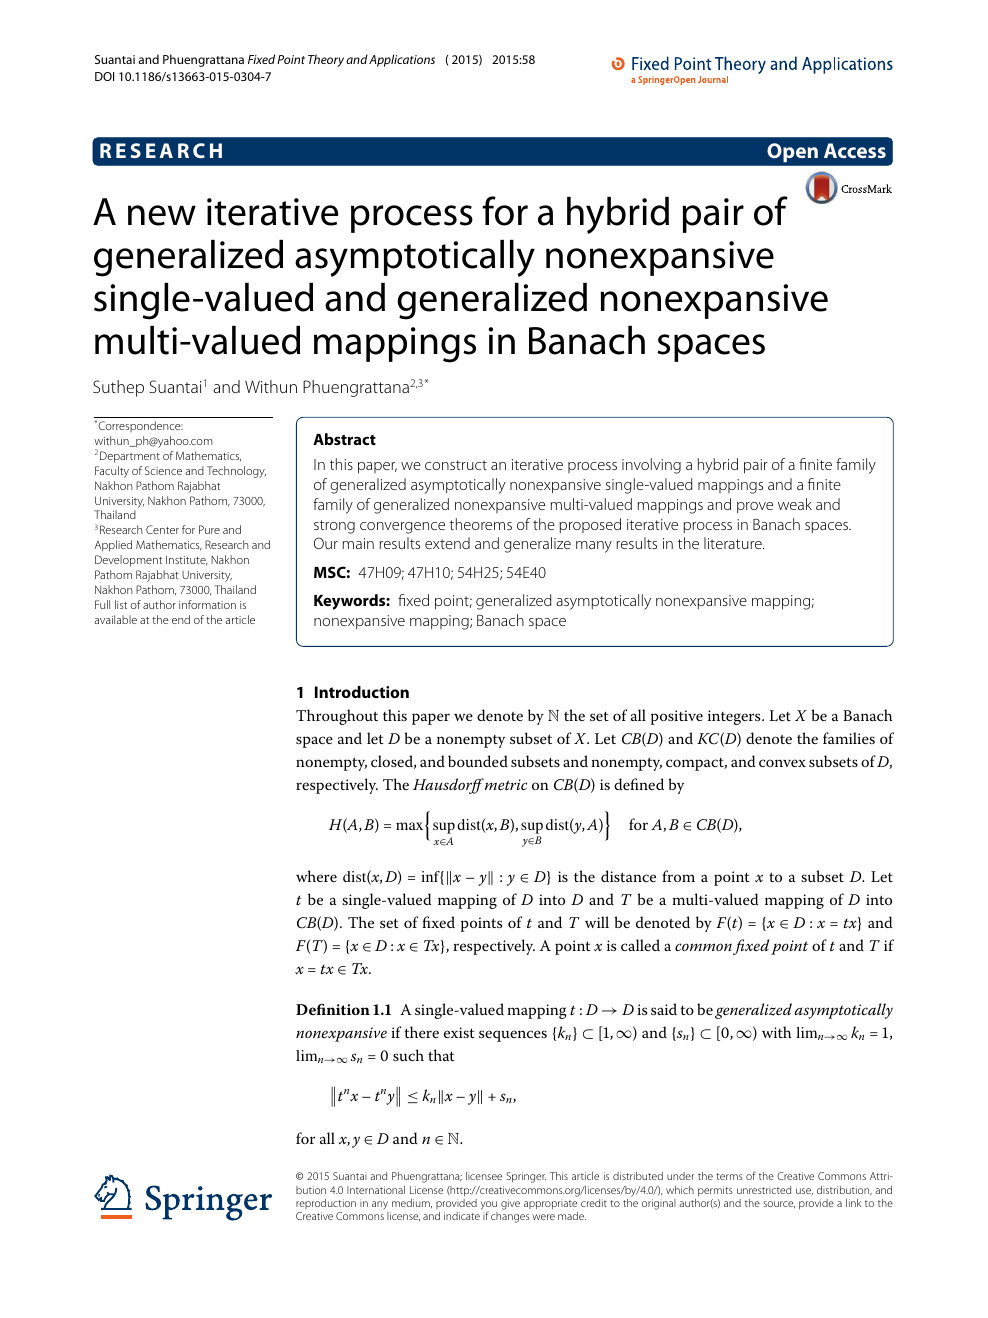 A New Iterative Process For A Hybrid Pair Of Generalized Asymptotically Nonexpansive Single Valued And Generalized Nonexpansive Multi Valued Mappings In Banach Spaces Topic Of Research Paper In Mathematics Download Scholarly Article Pdf